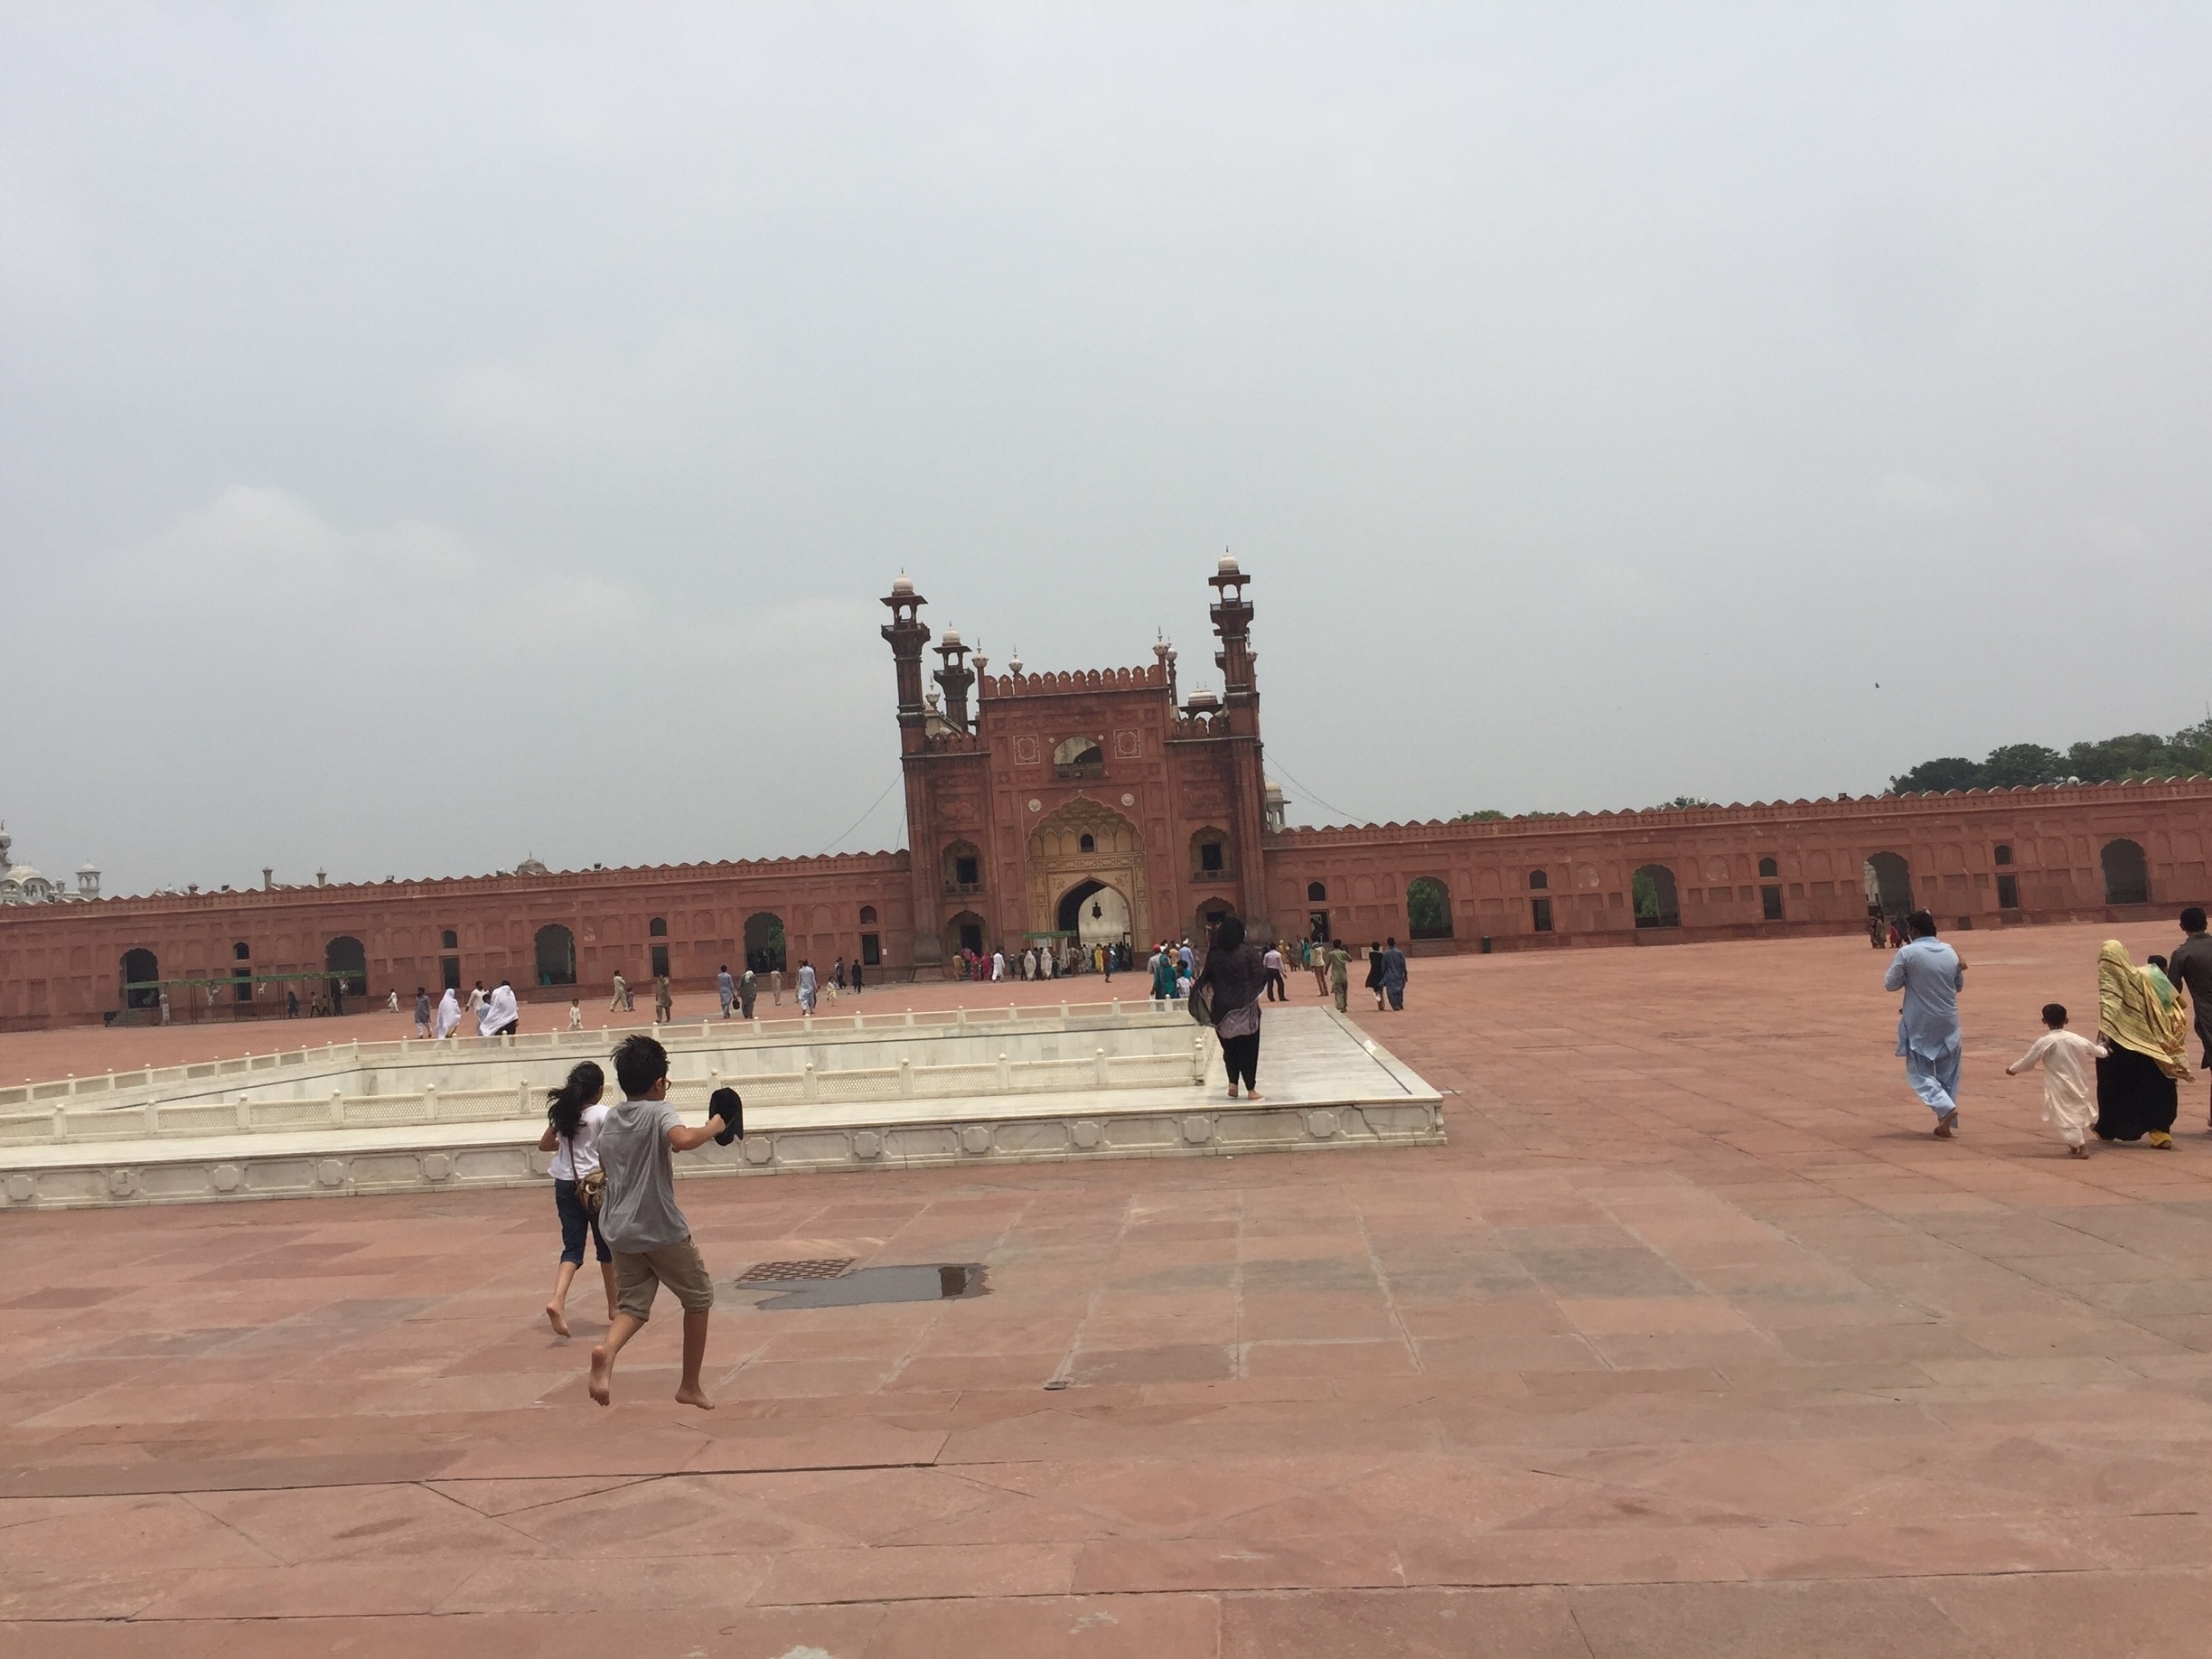 The Badshahi Mosque in Lahore was commissioned by the sixth Mughal Emperor Aurangzeb. Constructed between 1671 and 1673, it was the largest mosque in the world upon construction. 